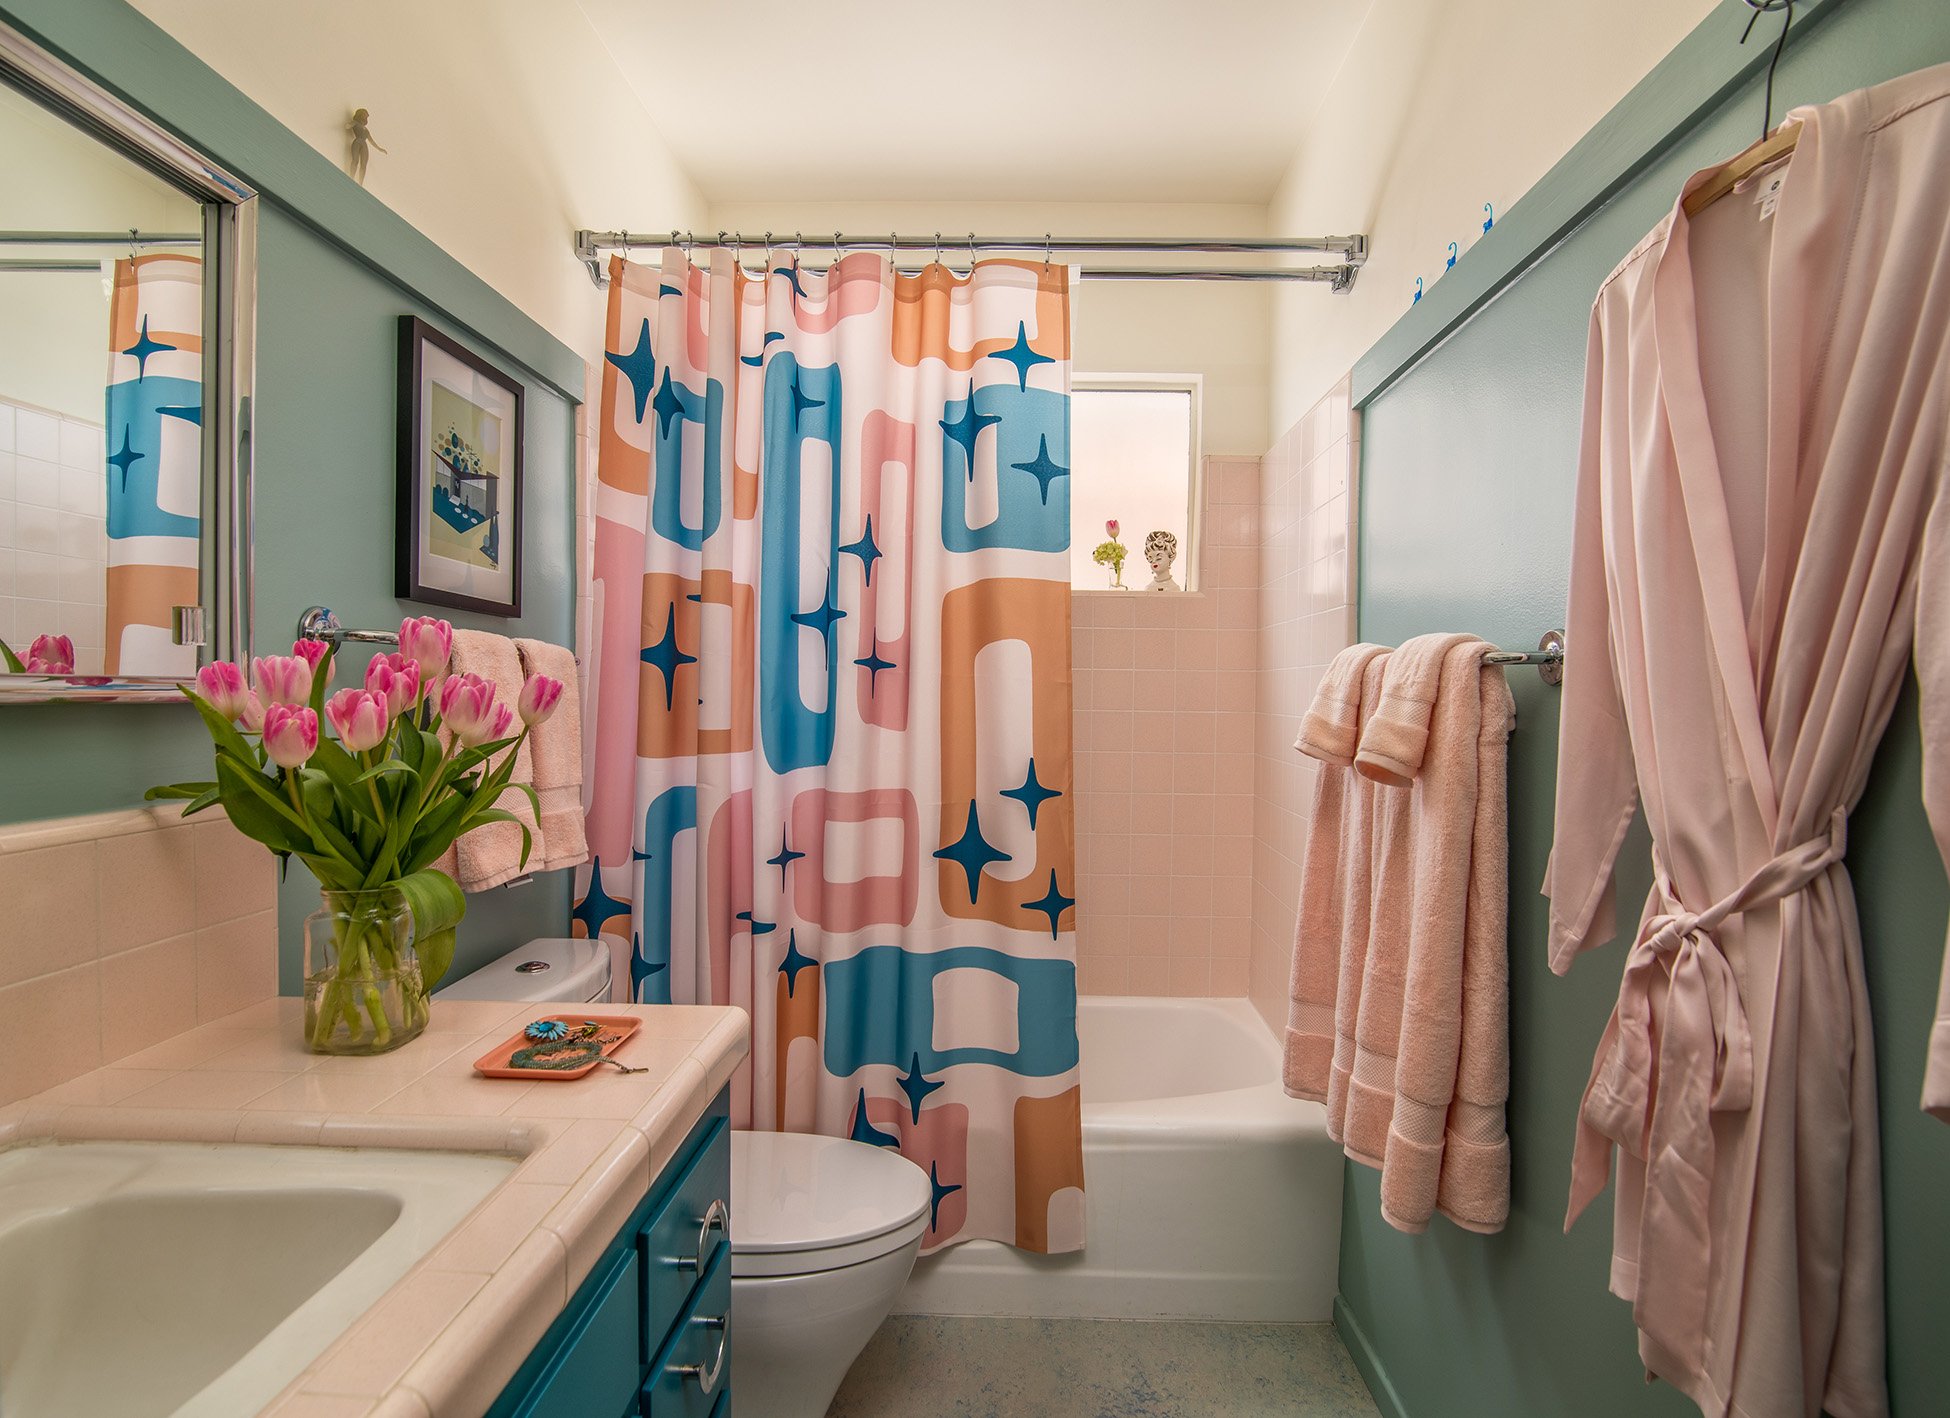 Home Front Build - Atomic Ranch 020-Pink & Blue Bath overall-Low Res.jpg